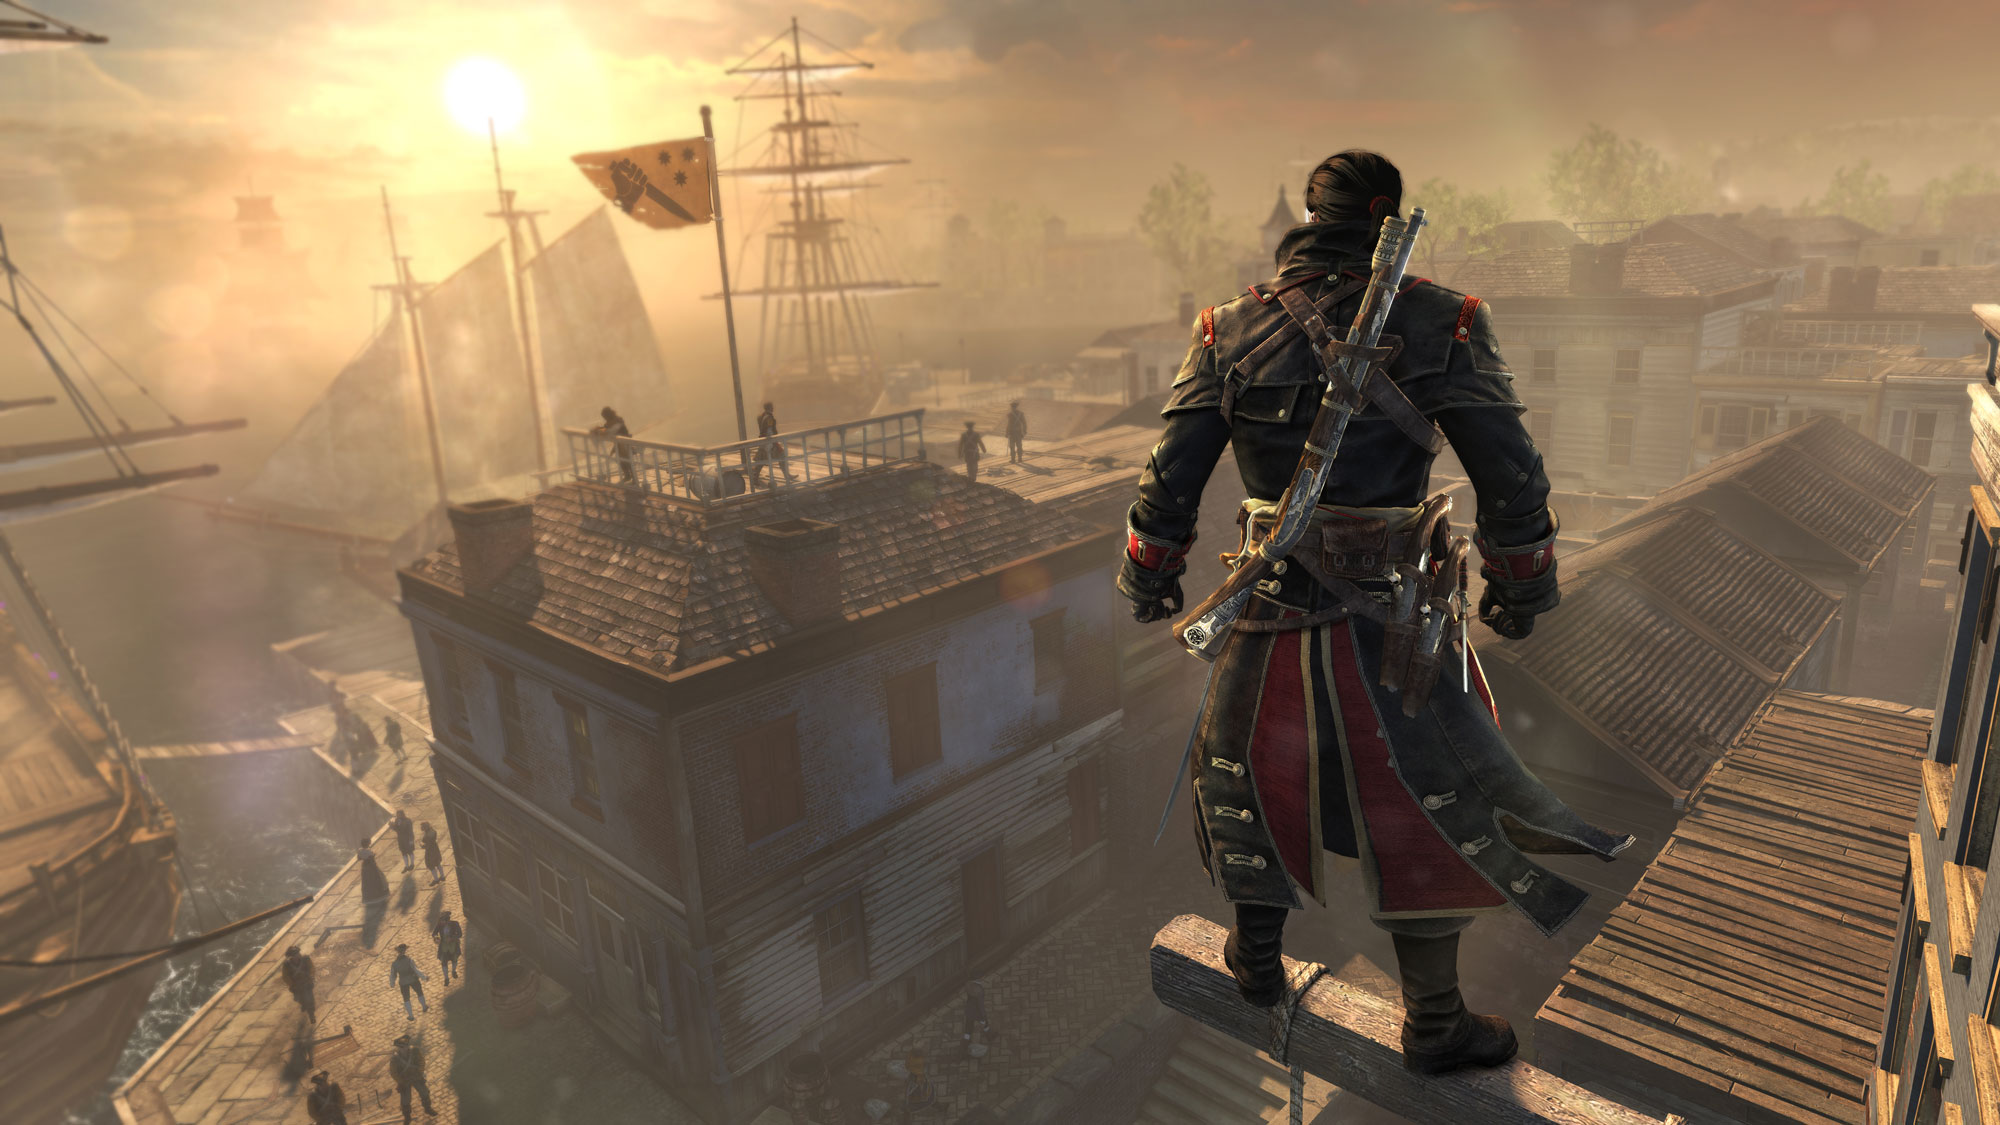 ac rogue wallpaper,action adventure game,pc game,screenshot,strategy video game,adventure game